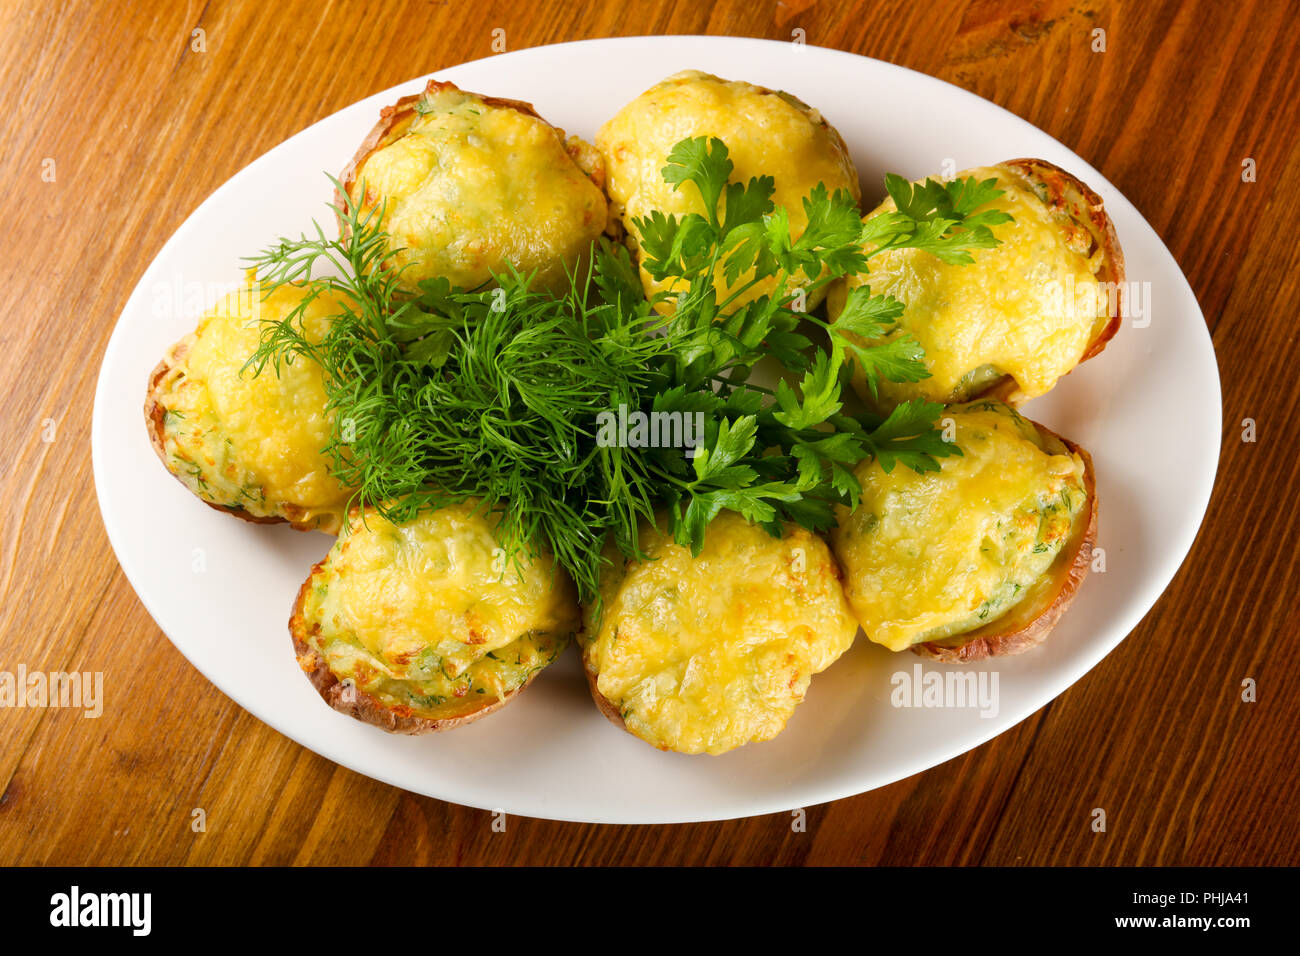 Baked potato with cheese and herbs Stock Photo